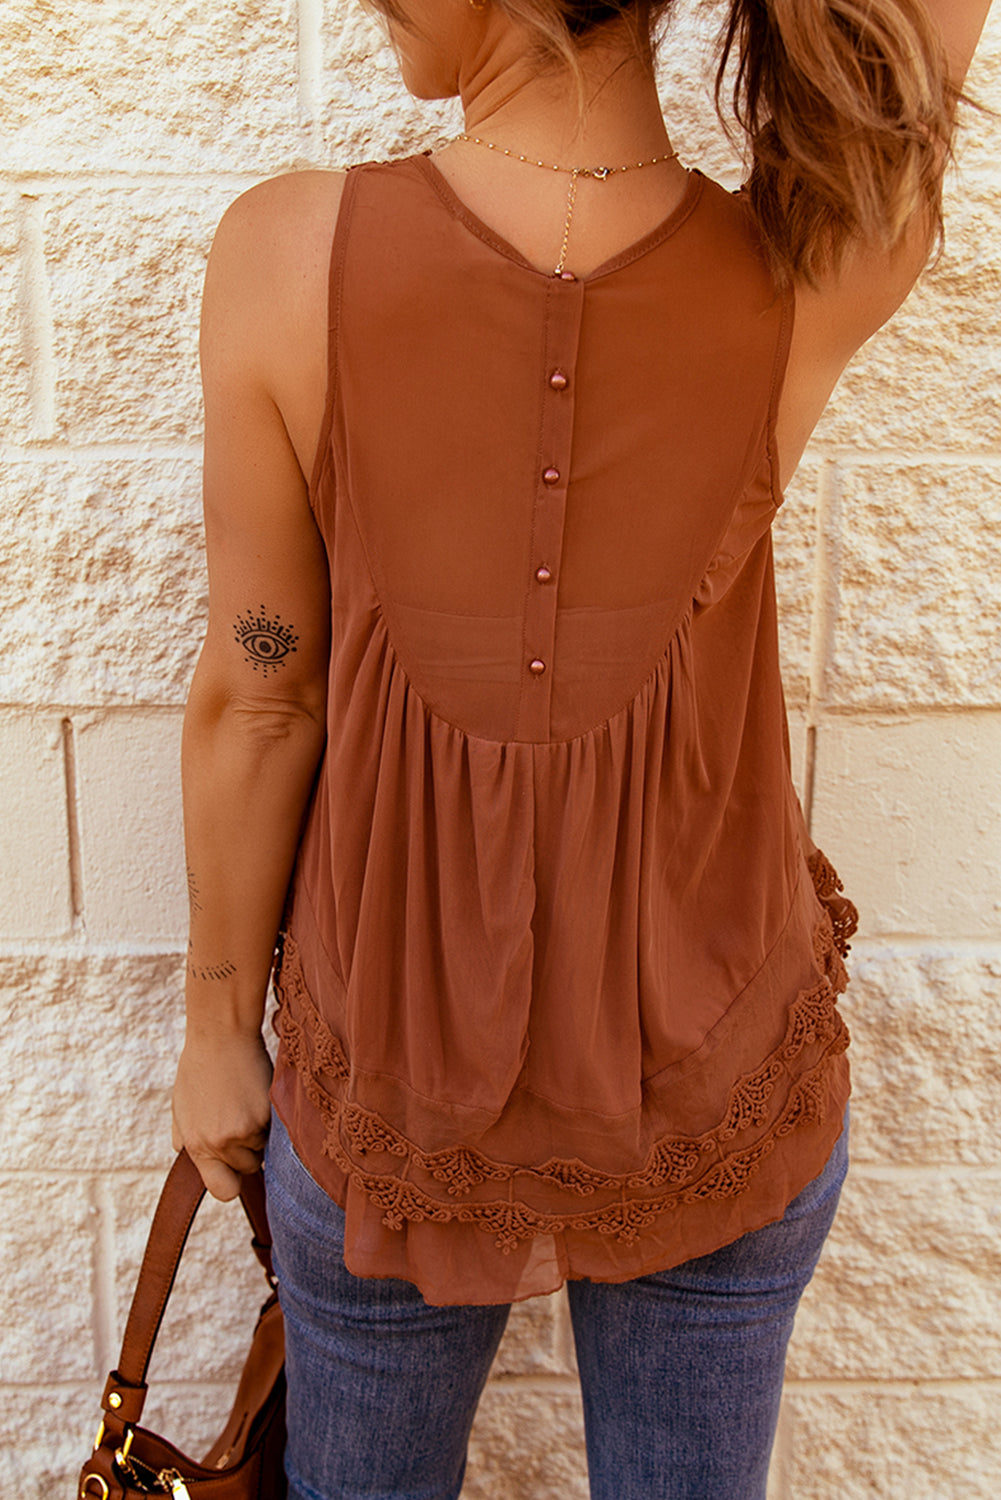 Lace Detail Buttons Back Sleeveless Top